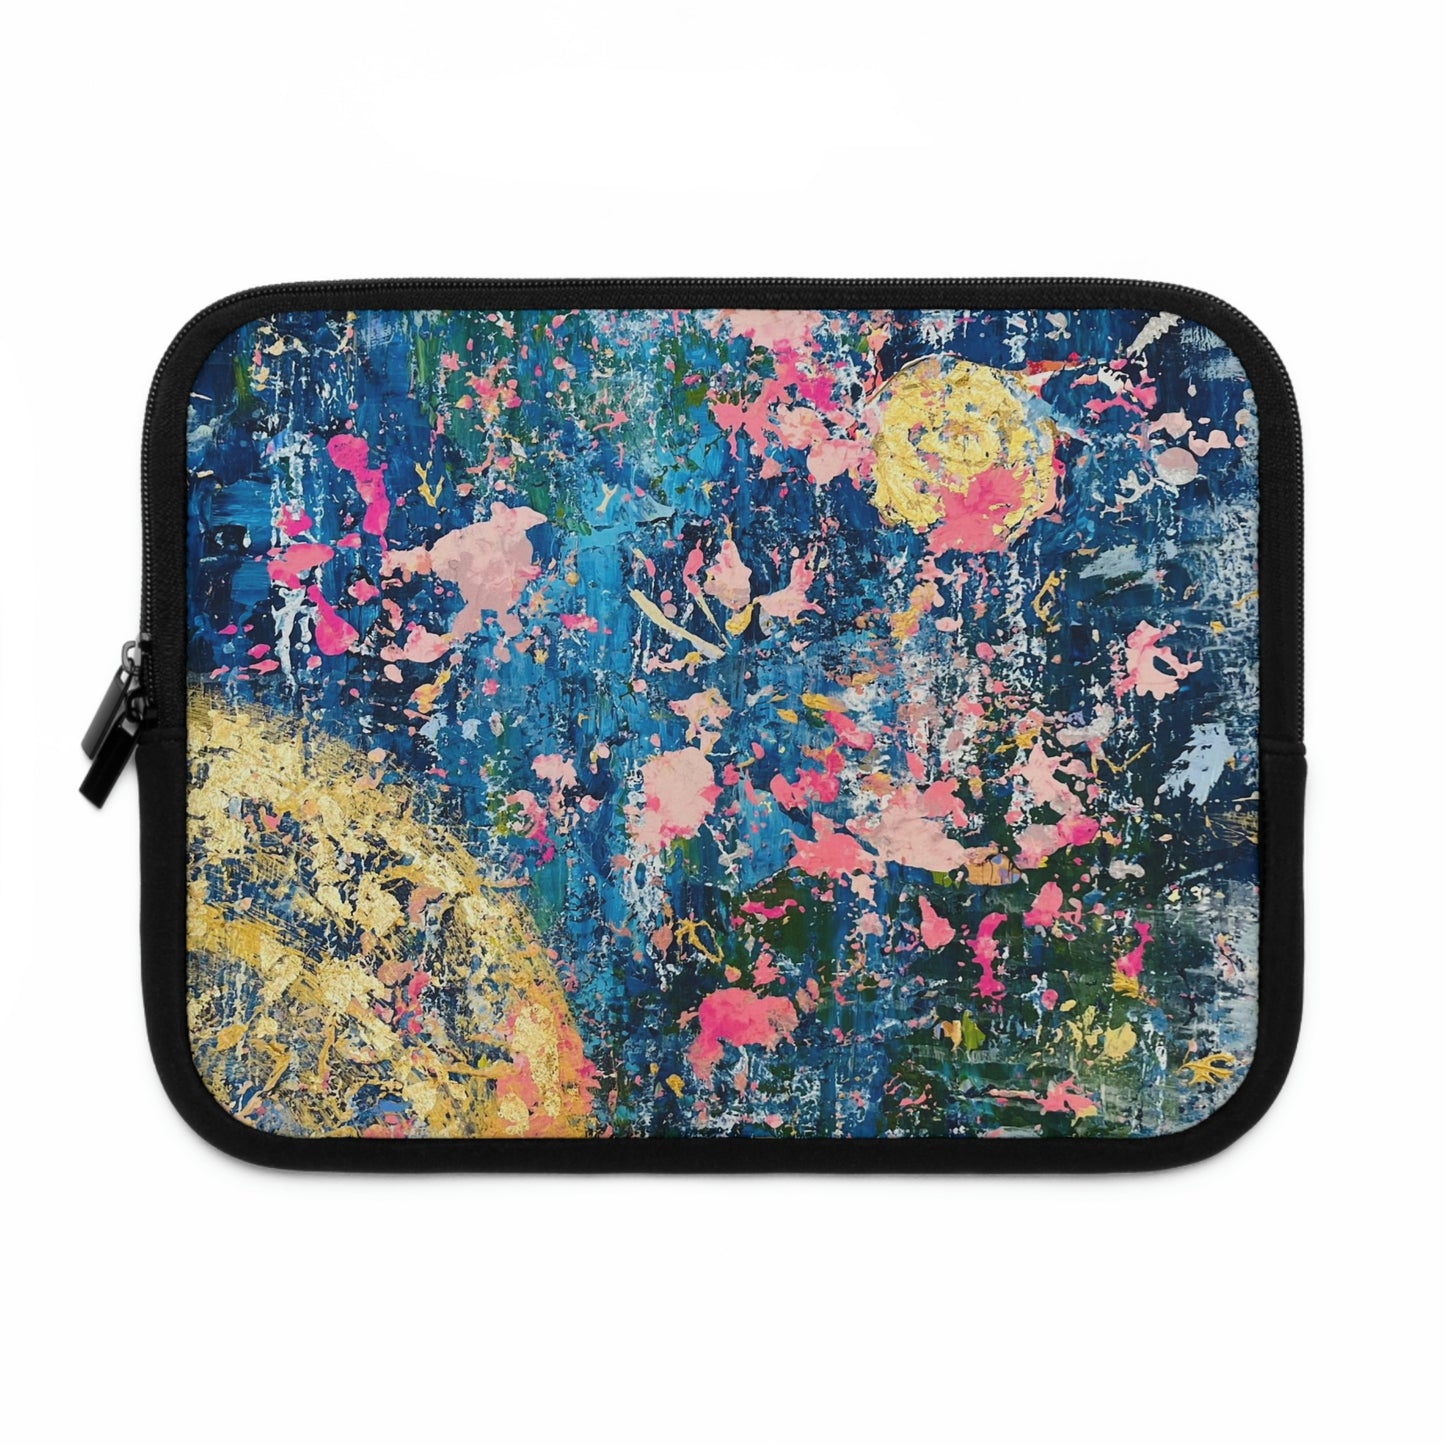 "When Pigs Fly" Laptop Sleeve